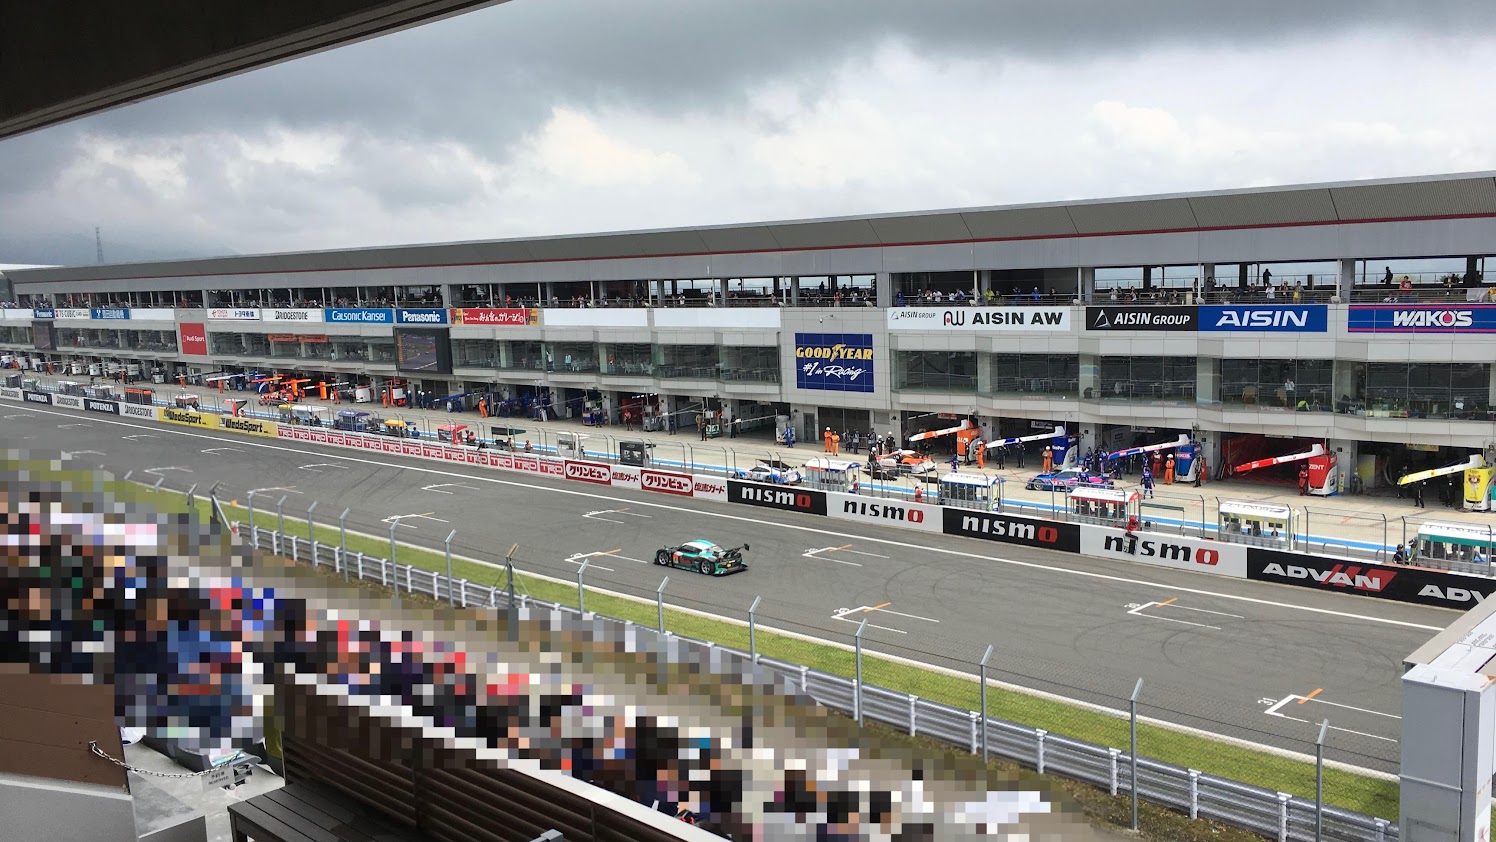 fuji-speedway-photo-shooting-point-grand-stand03.jpg